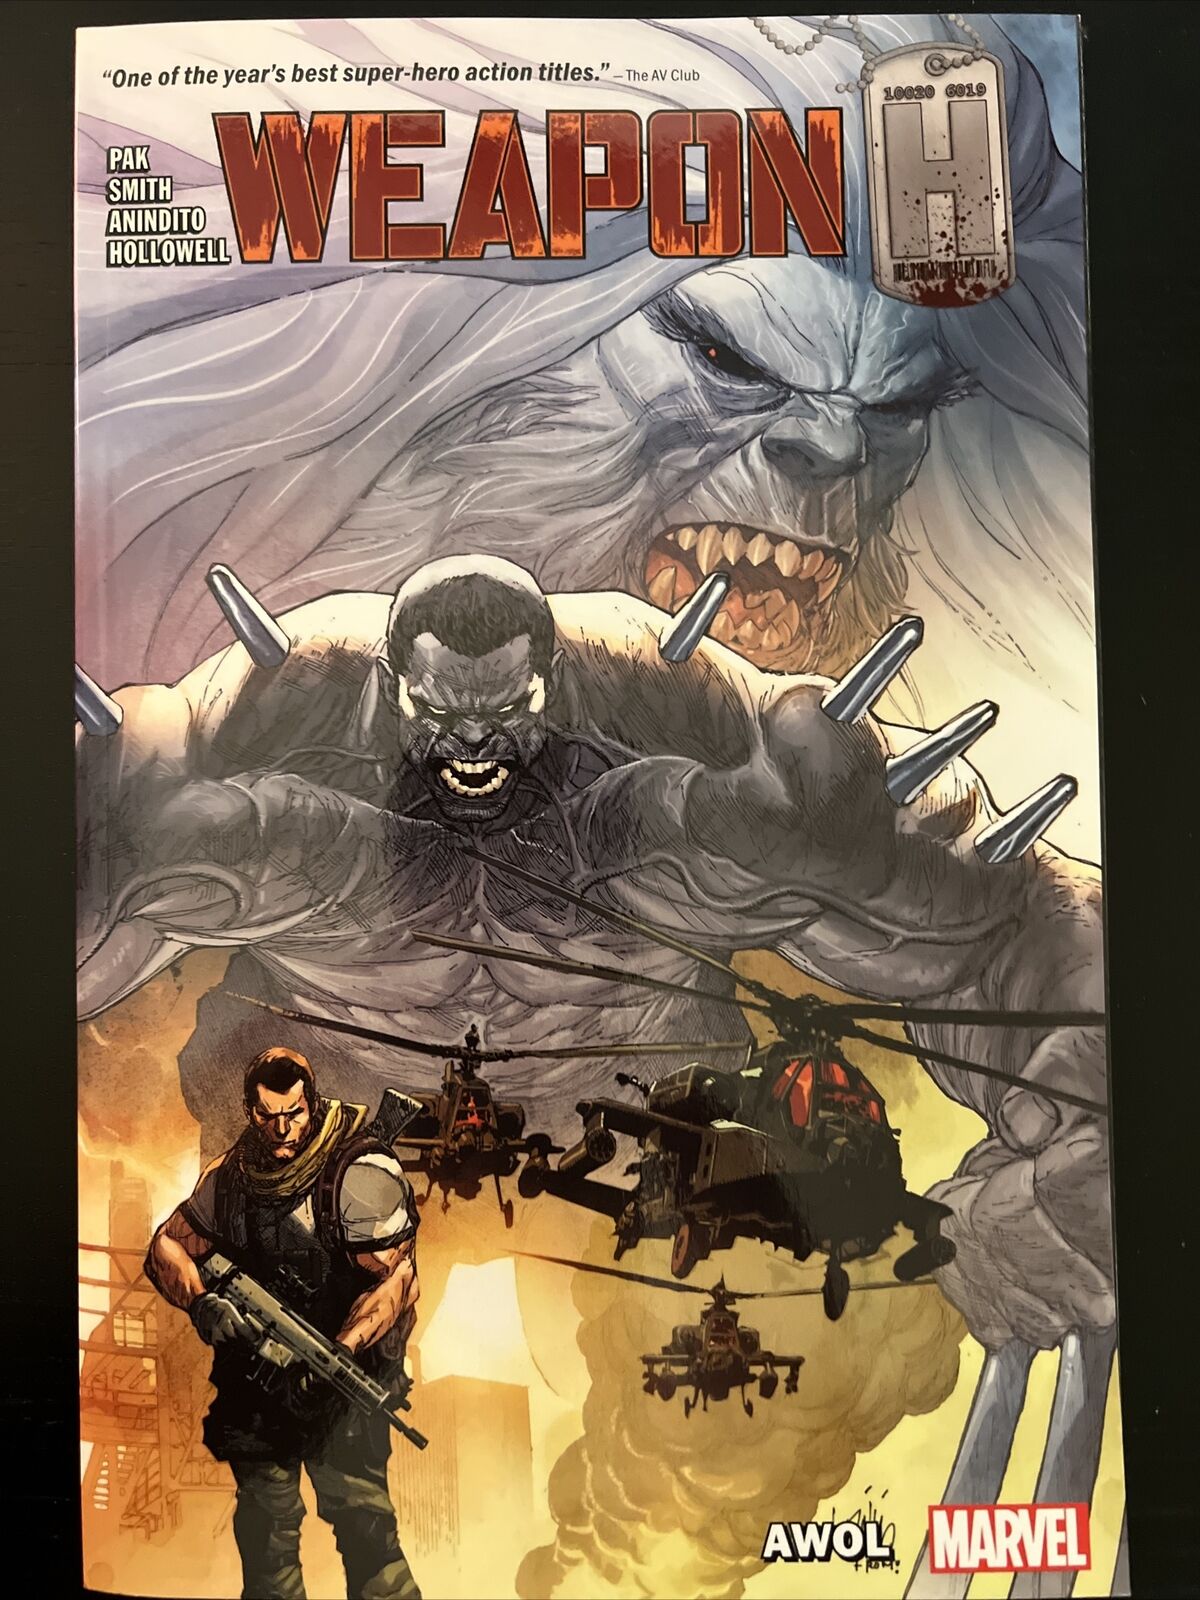 Weapon H #1 (Marvel, 2018, Trade Paperback) NEW